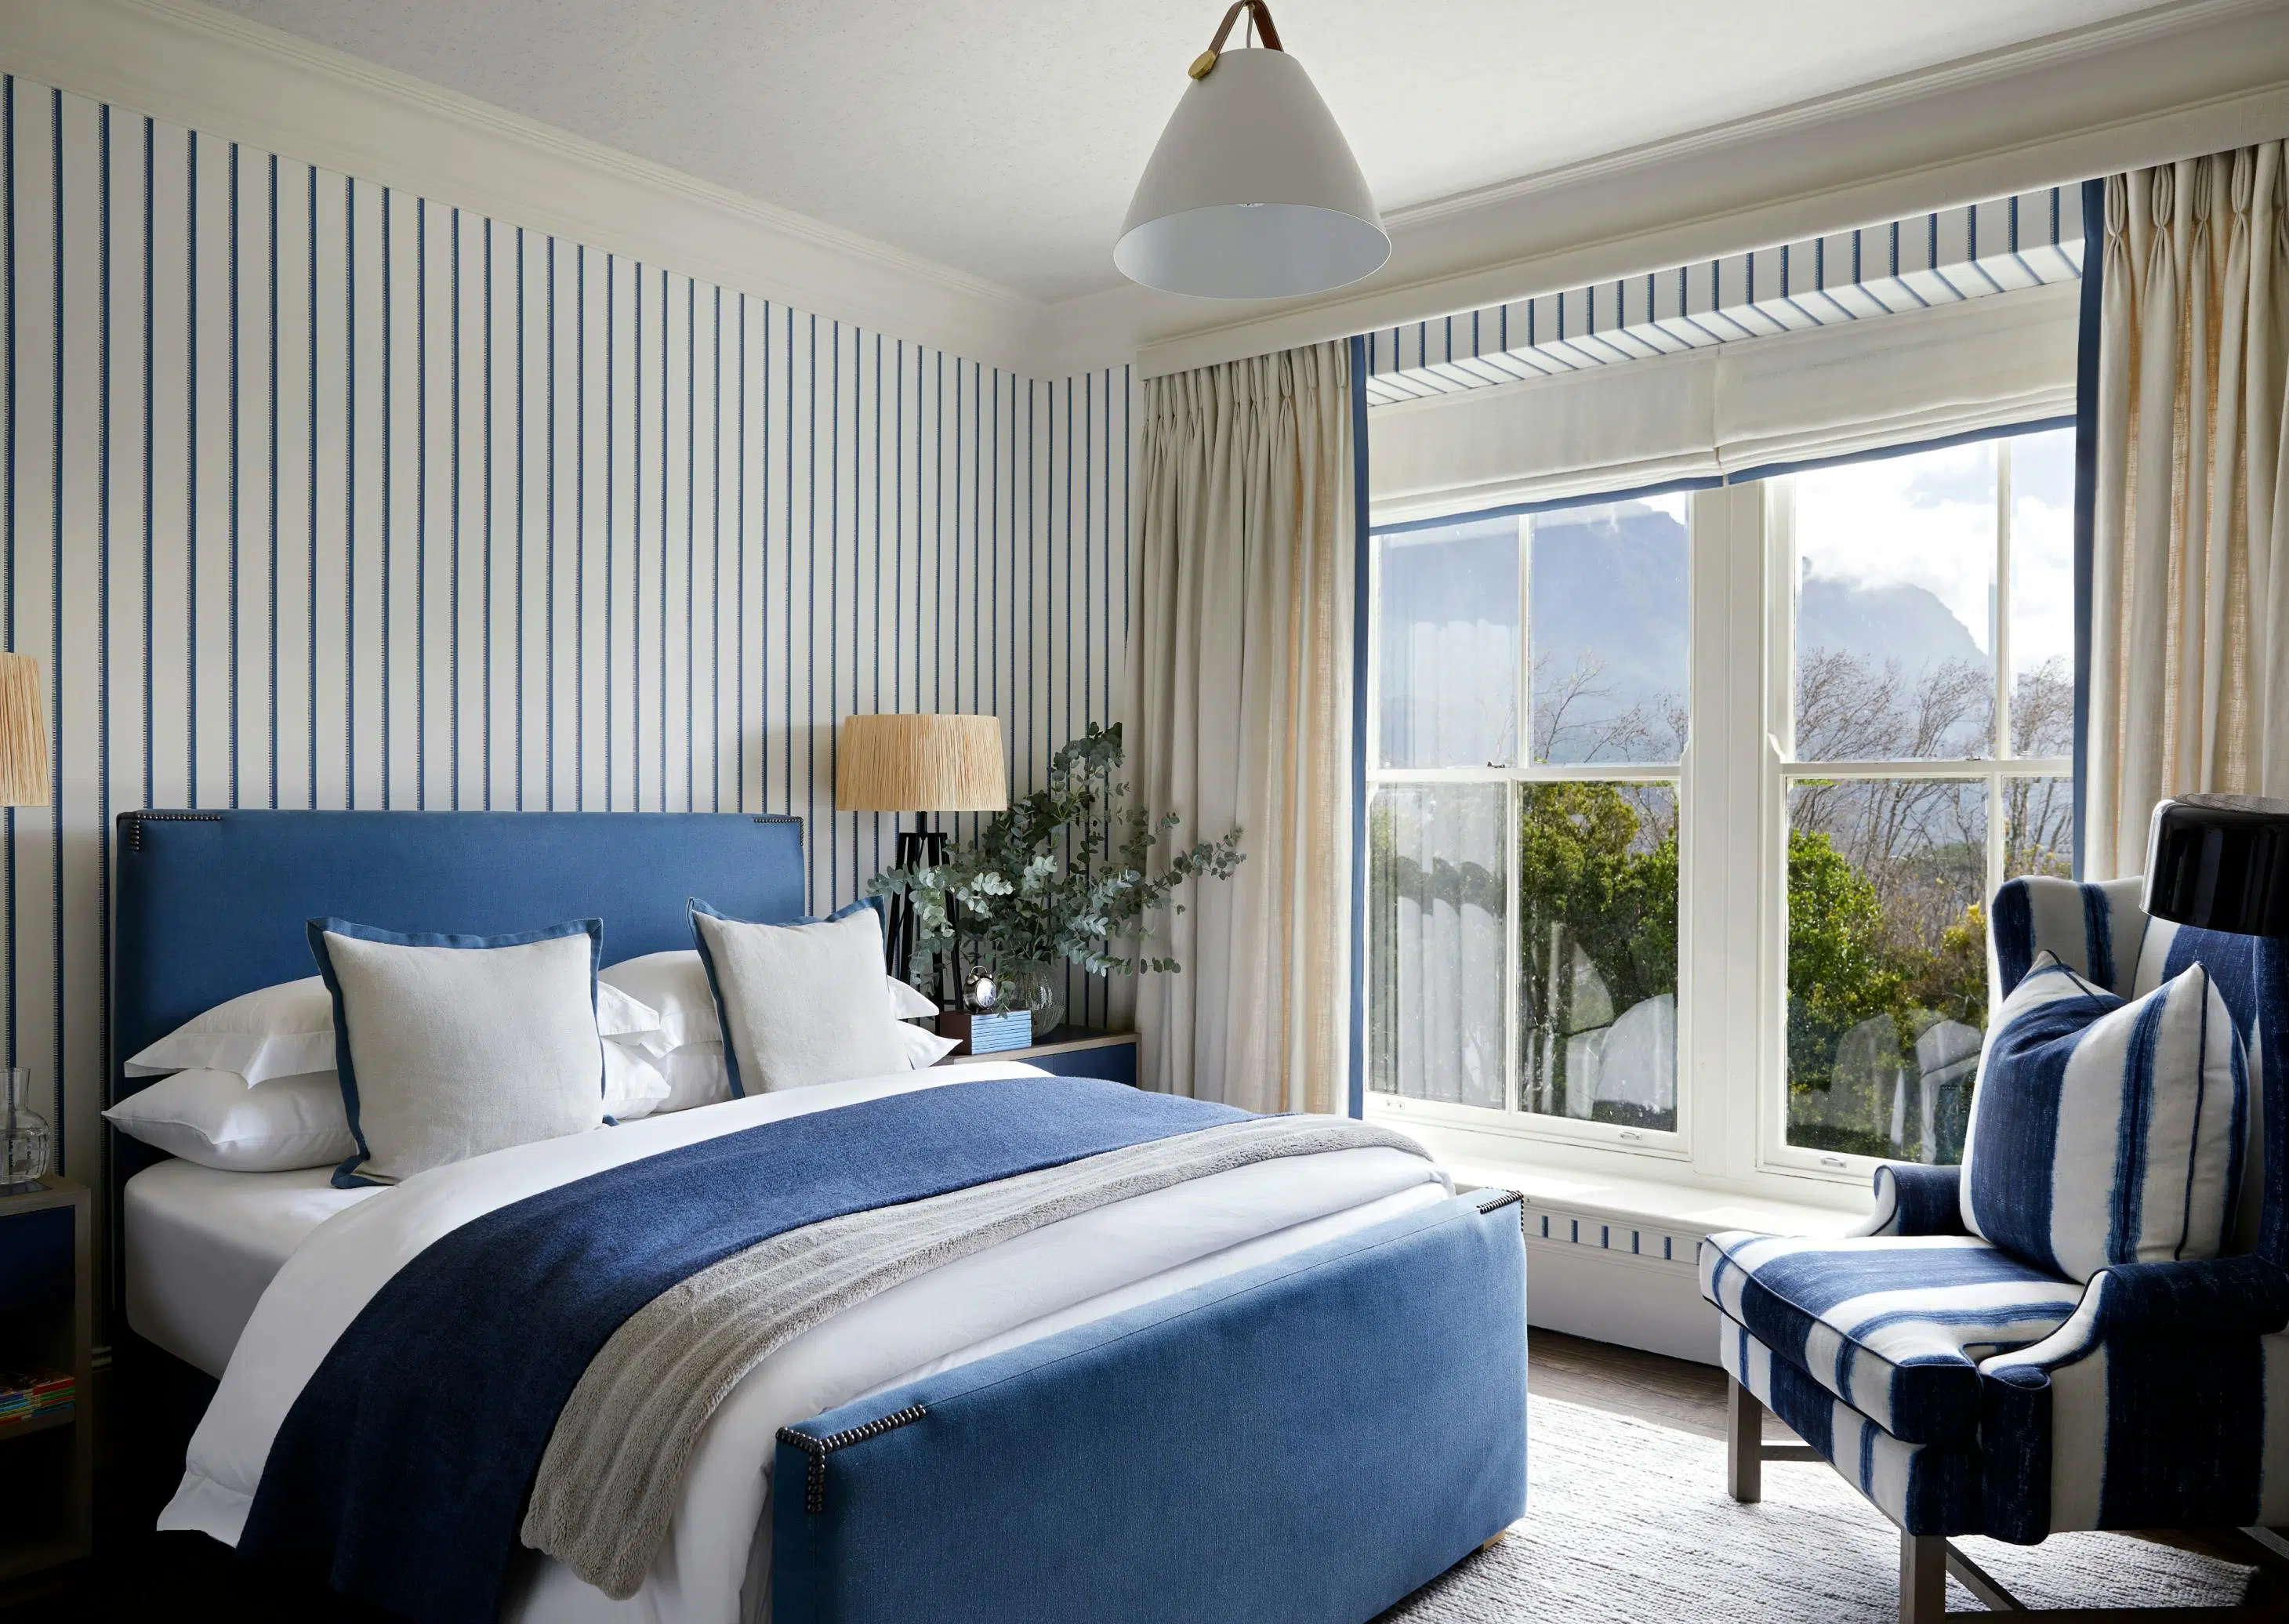 A contemporary bedroom with blue and white striped wallpaper, a navy blue bed layered in blue, white and grey bedding and an armchair in the corner next to a window with a view of trees.